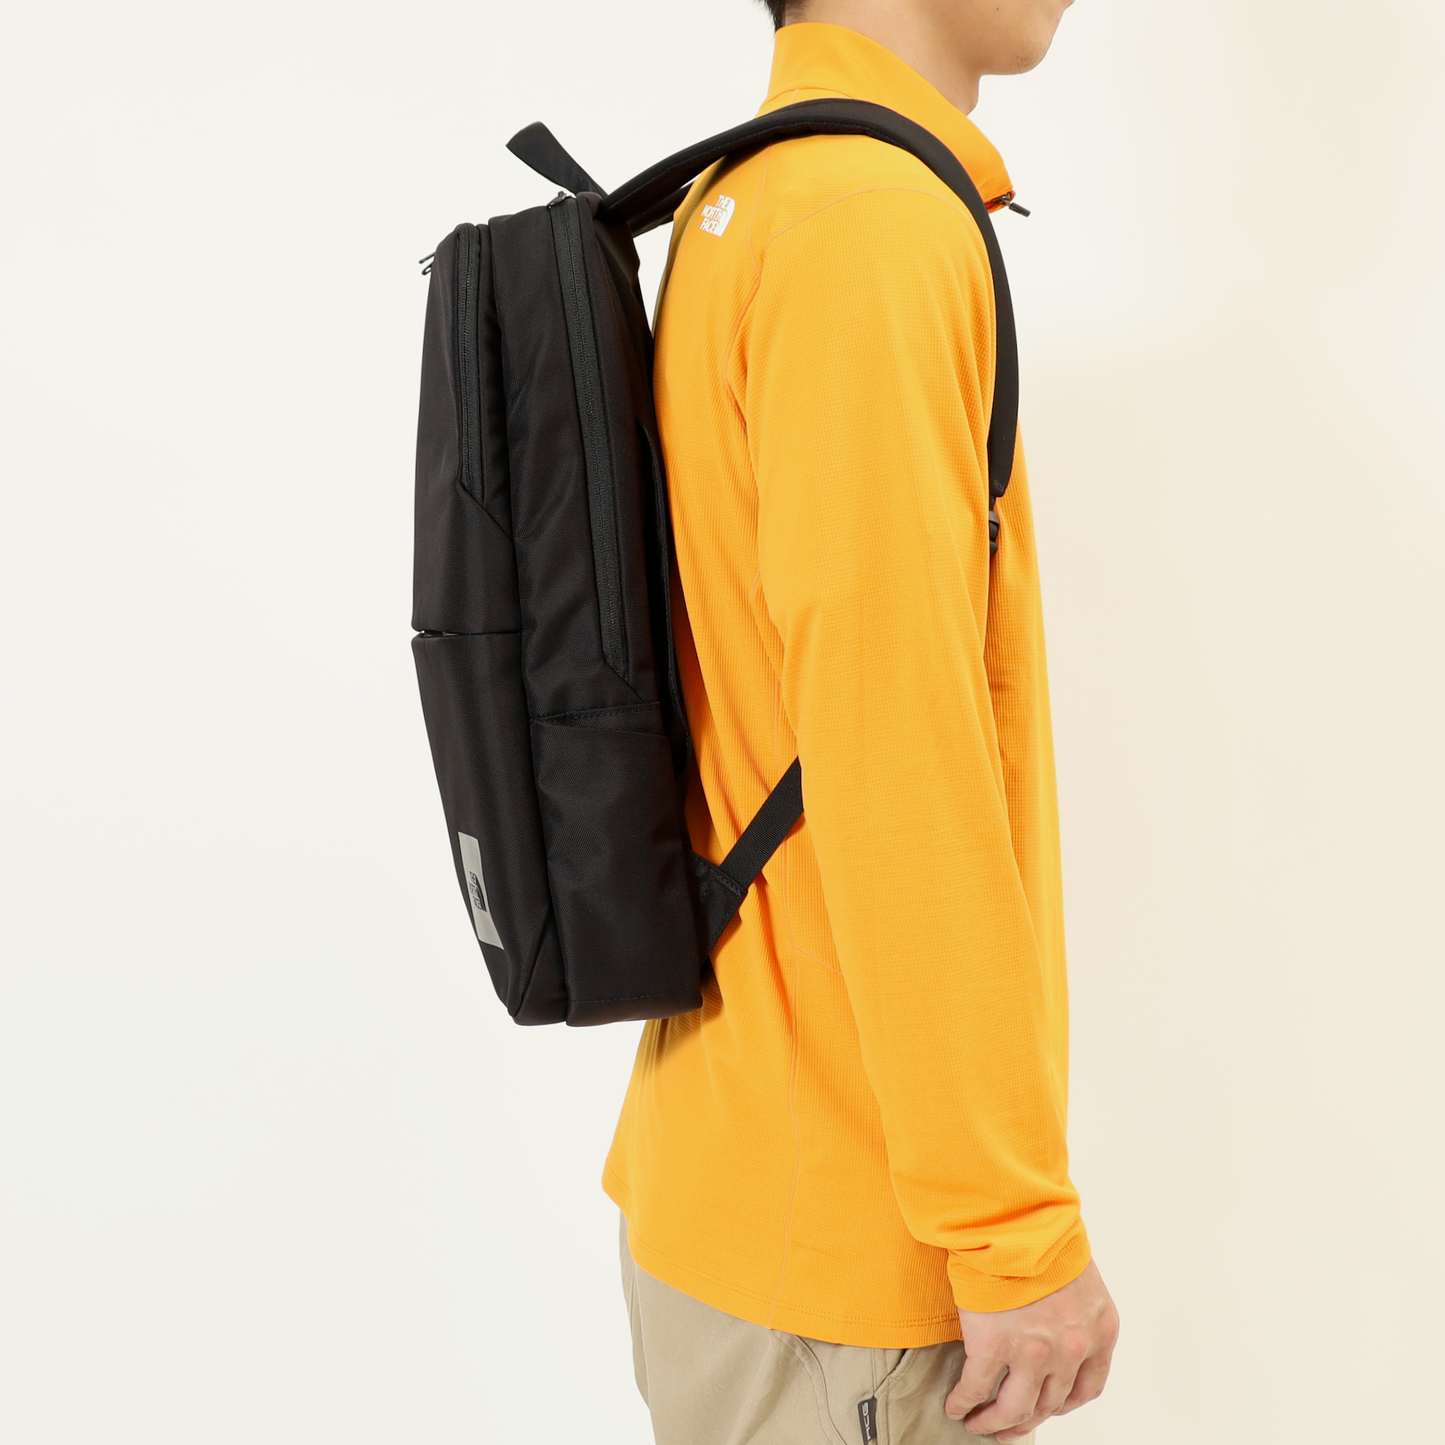 【THE NORTH FACE】Shuttle Daypack Slim